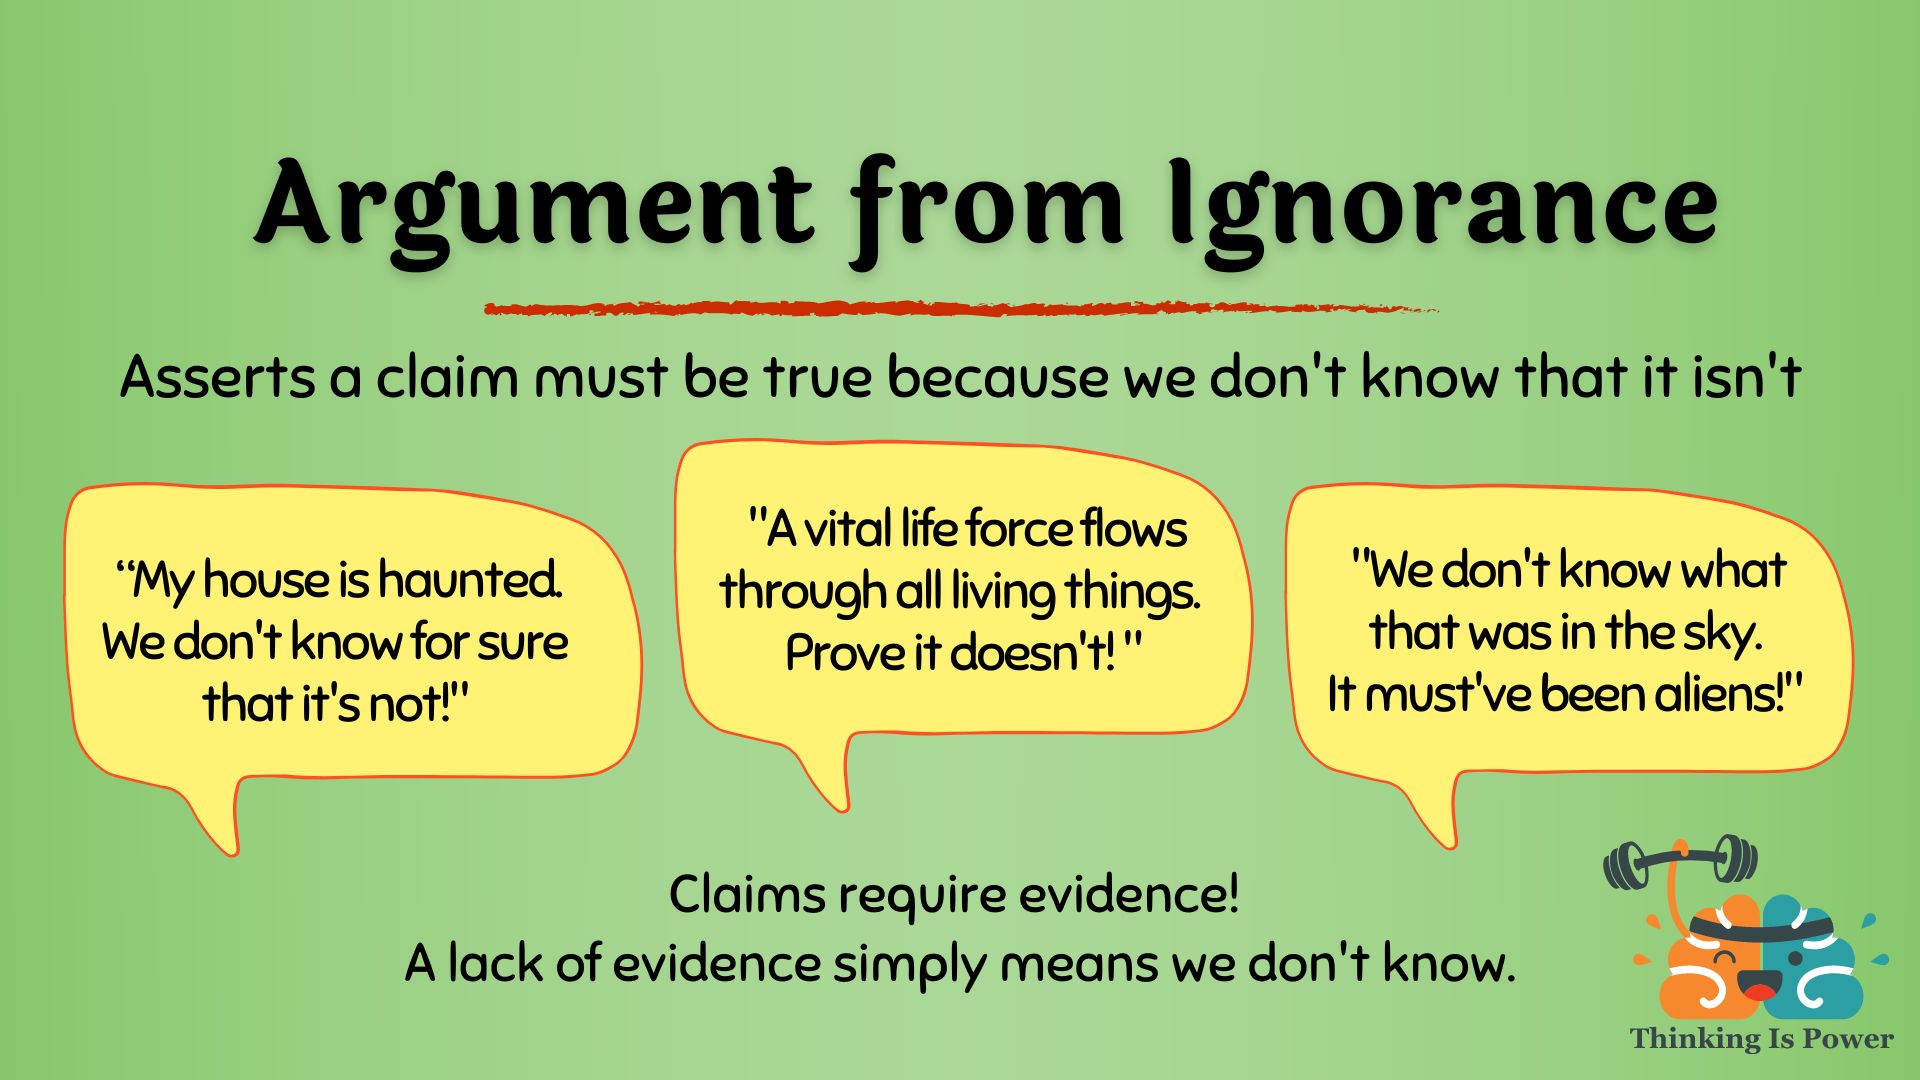 Argument from ignorance logical fallacy asserts a claim is true because we don't know that it's not. We don't know exactly how the pyramids were built. It must've been aliens. That had to have been a ghost! You can't prove it wasn't. Just because science can't explain chi yet doesn't mean it isn't real. Claims require evidence. A lack of evidence simply means we don't know.